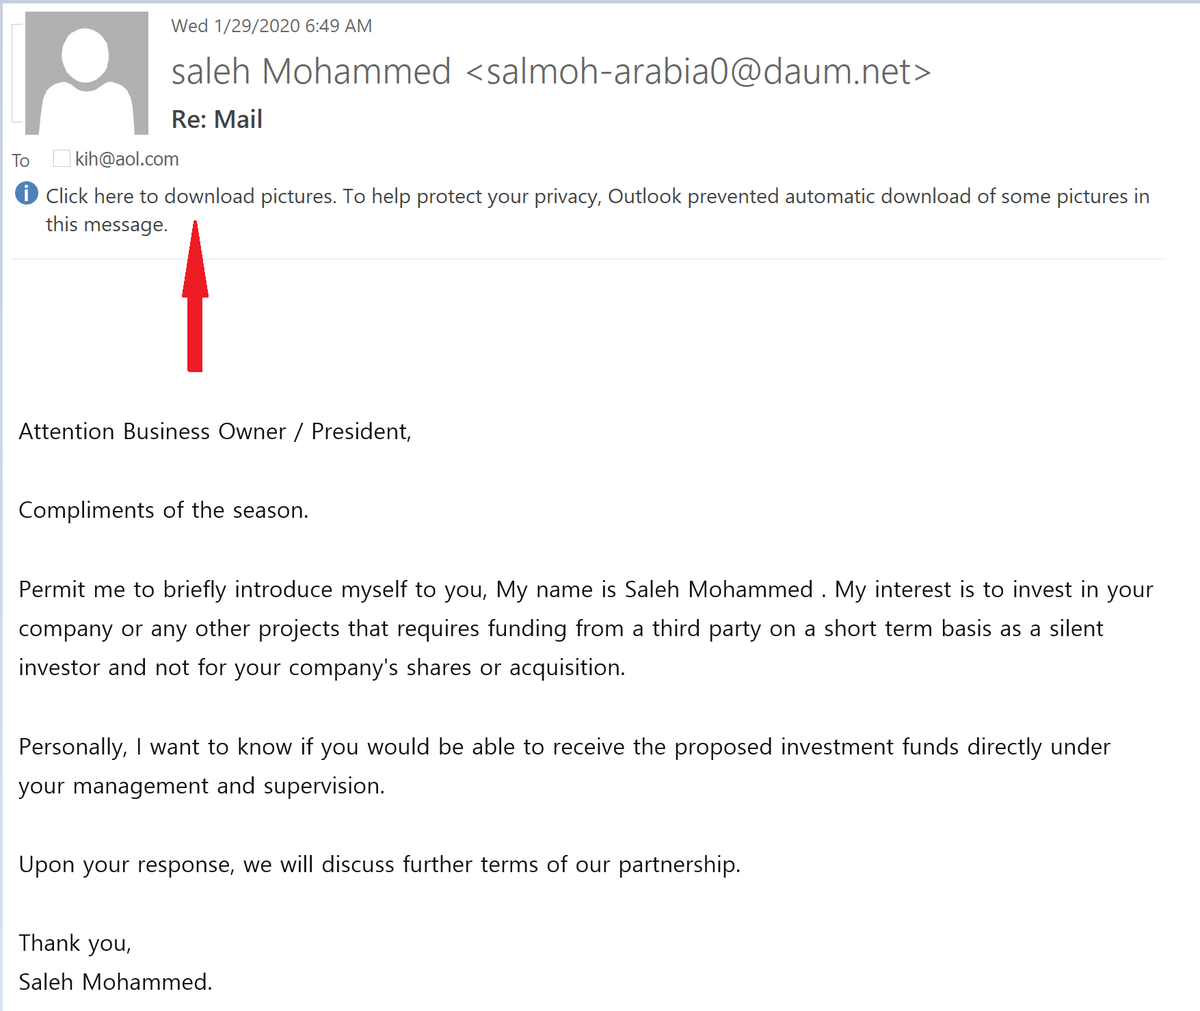 Even scammers leverage tracking pixels to gauge the success of their campaigns. I could really use a silent investor - you think I should reach out to Mr. Mohammed?